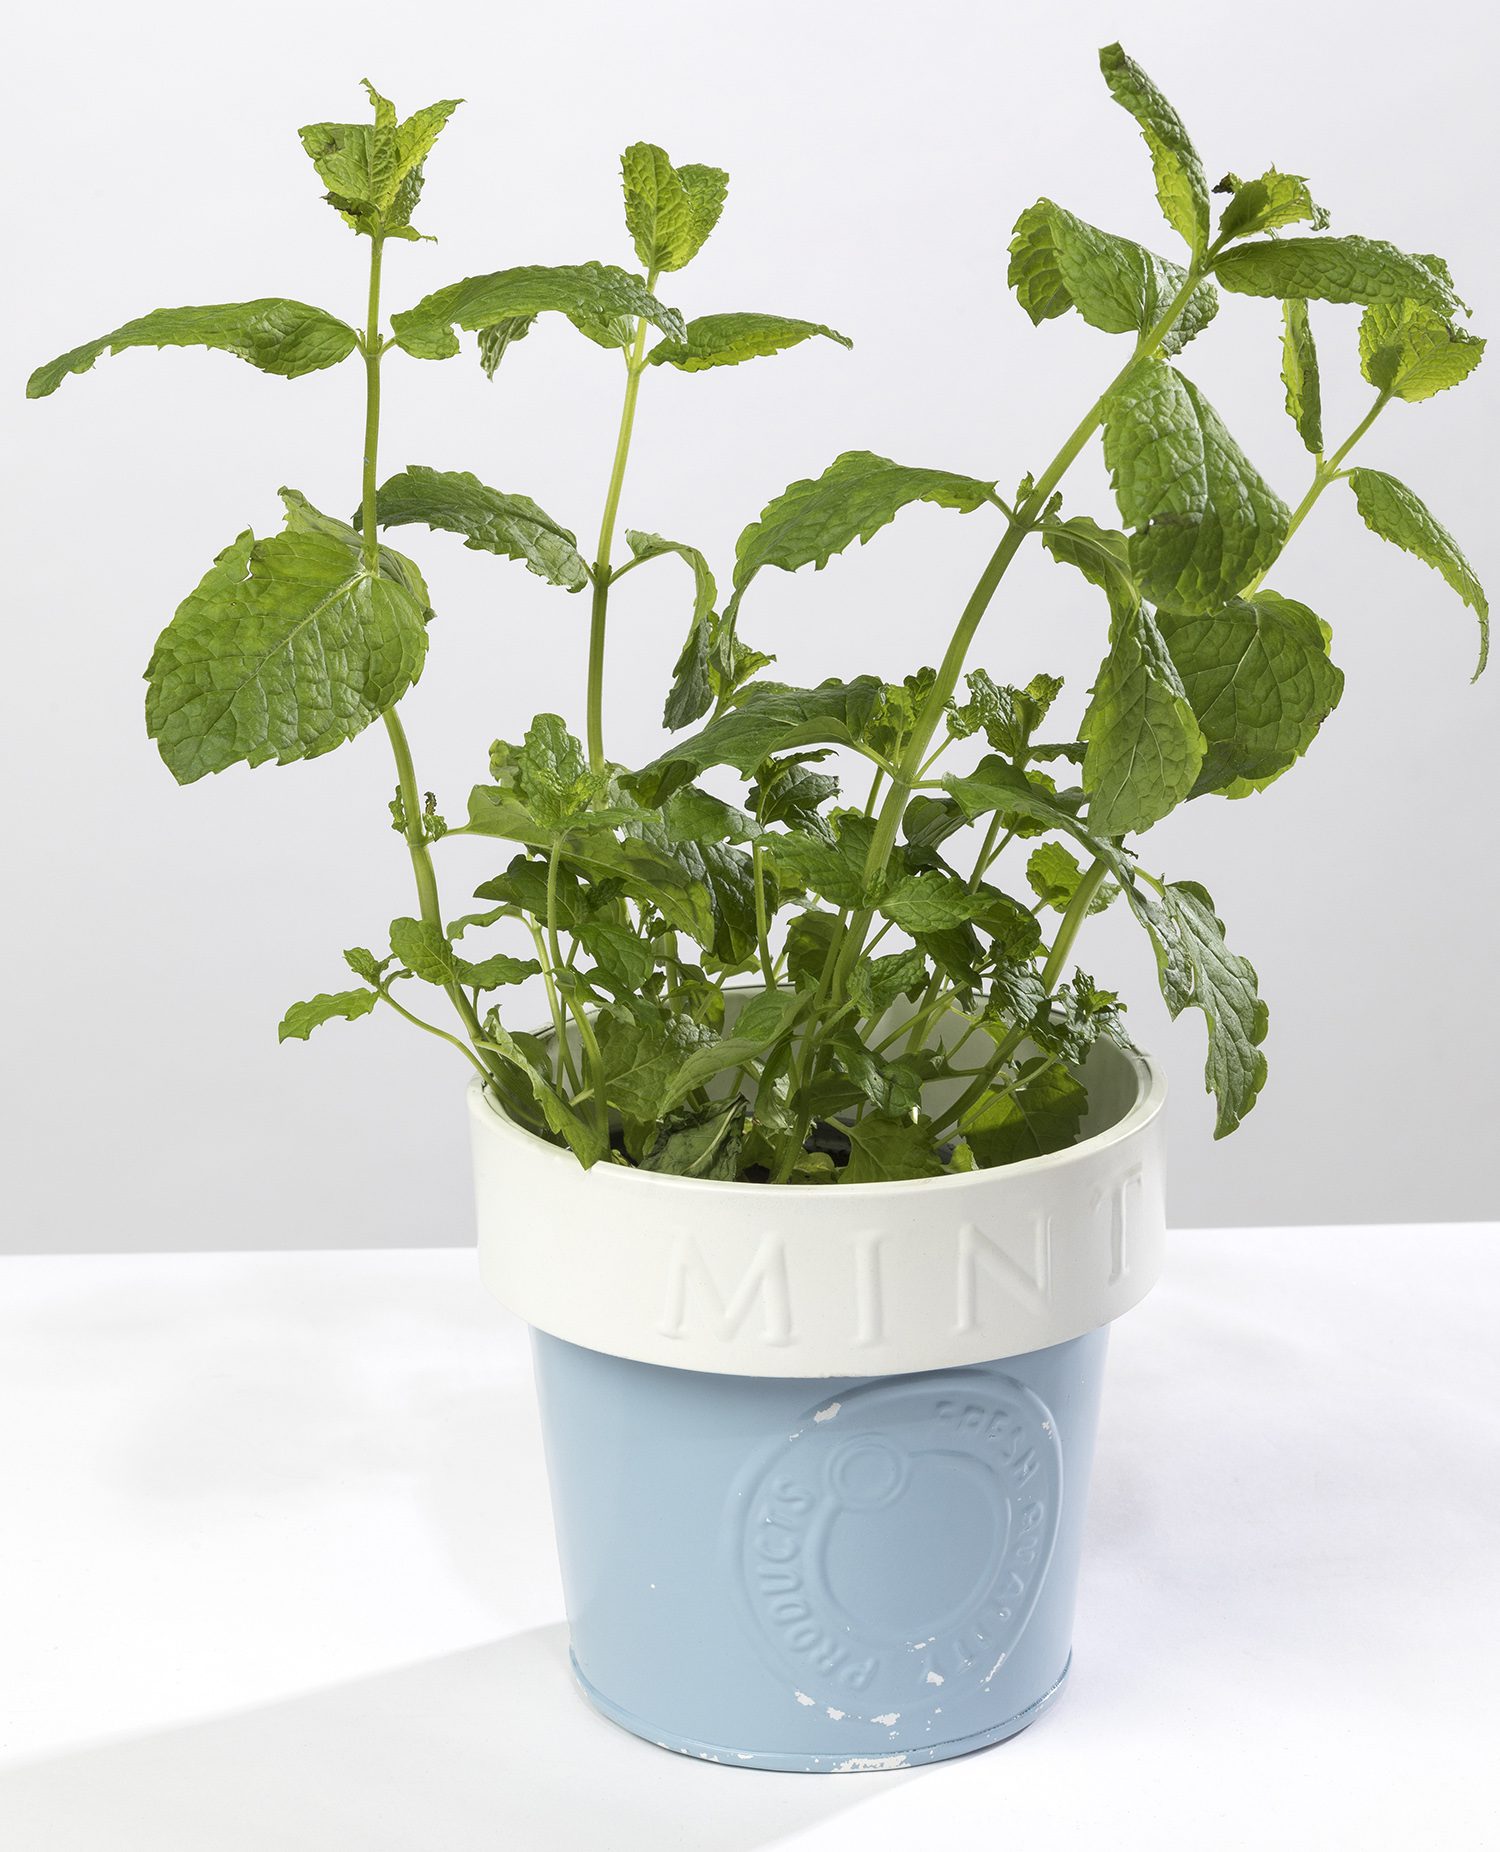 This metal herb pot "Mint" looks lovely on the kitchen sill with herbs in it